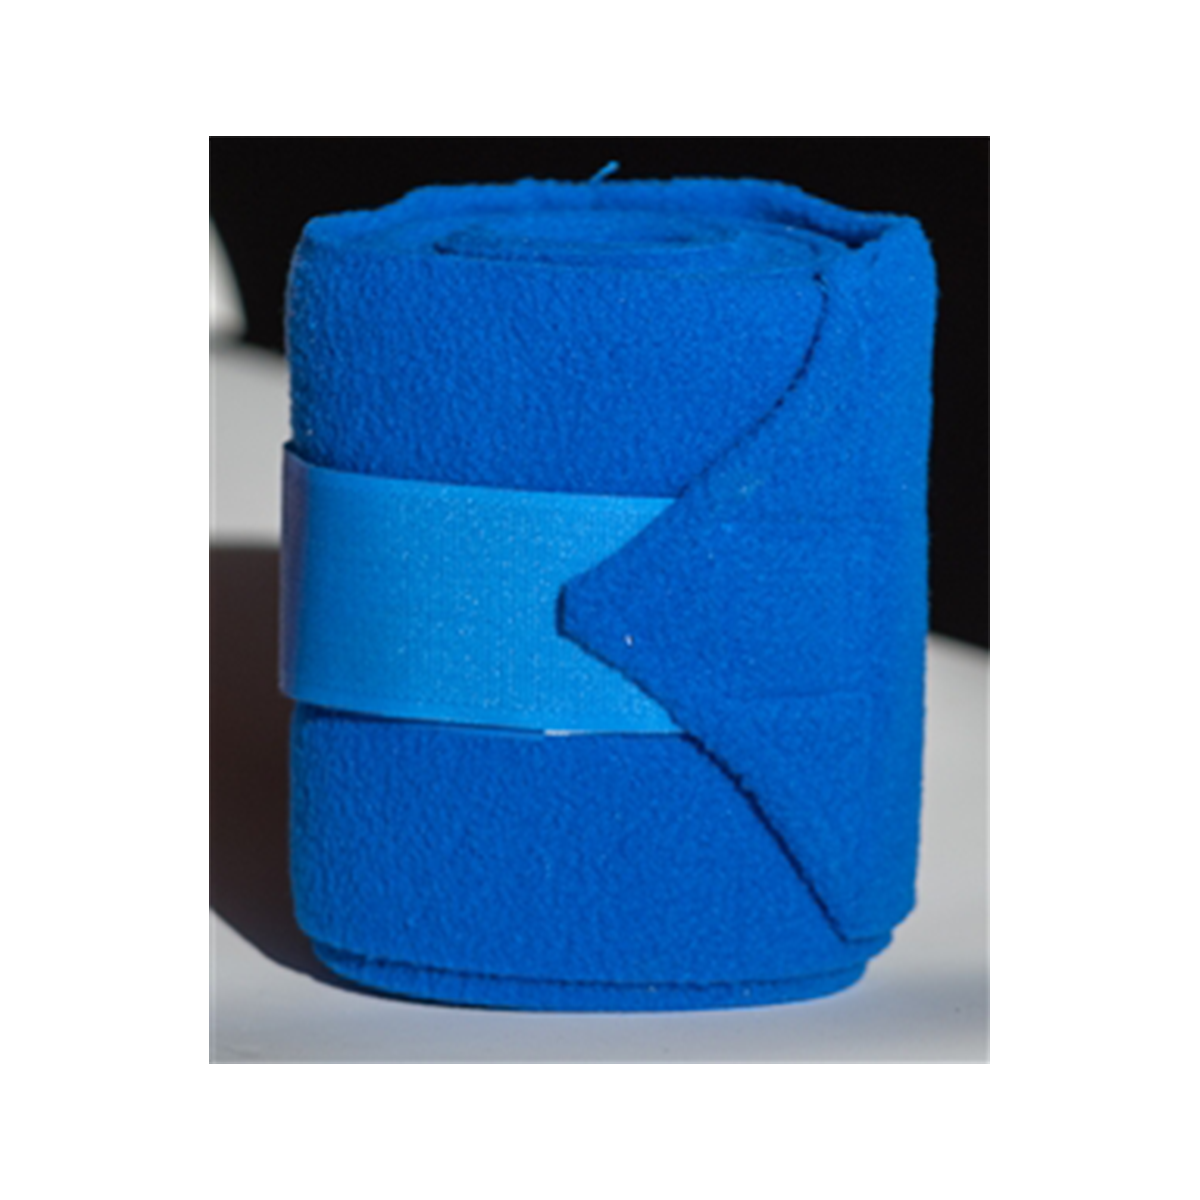 Vac's Deluxe Polo Bandage